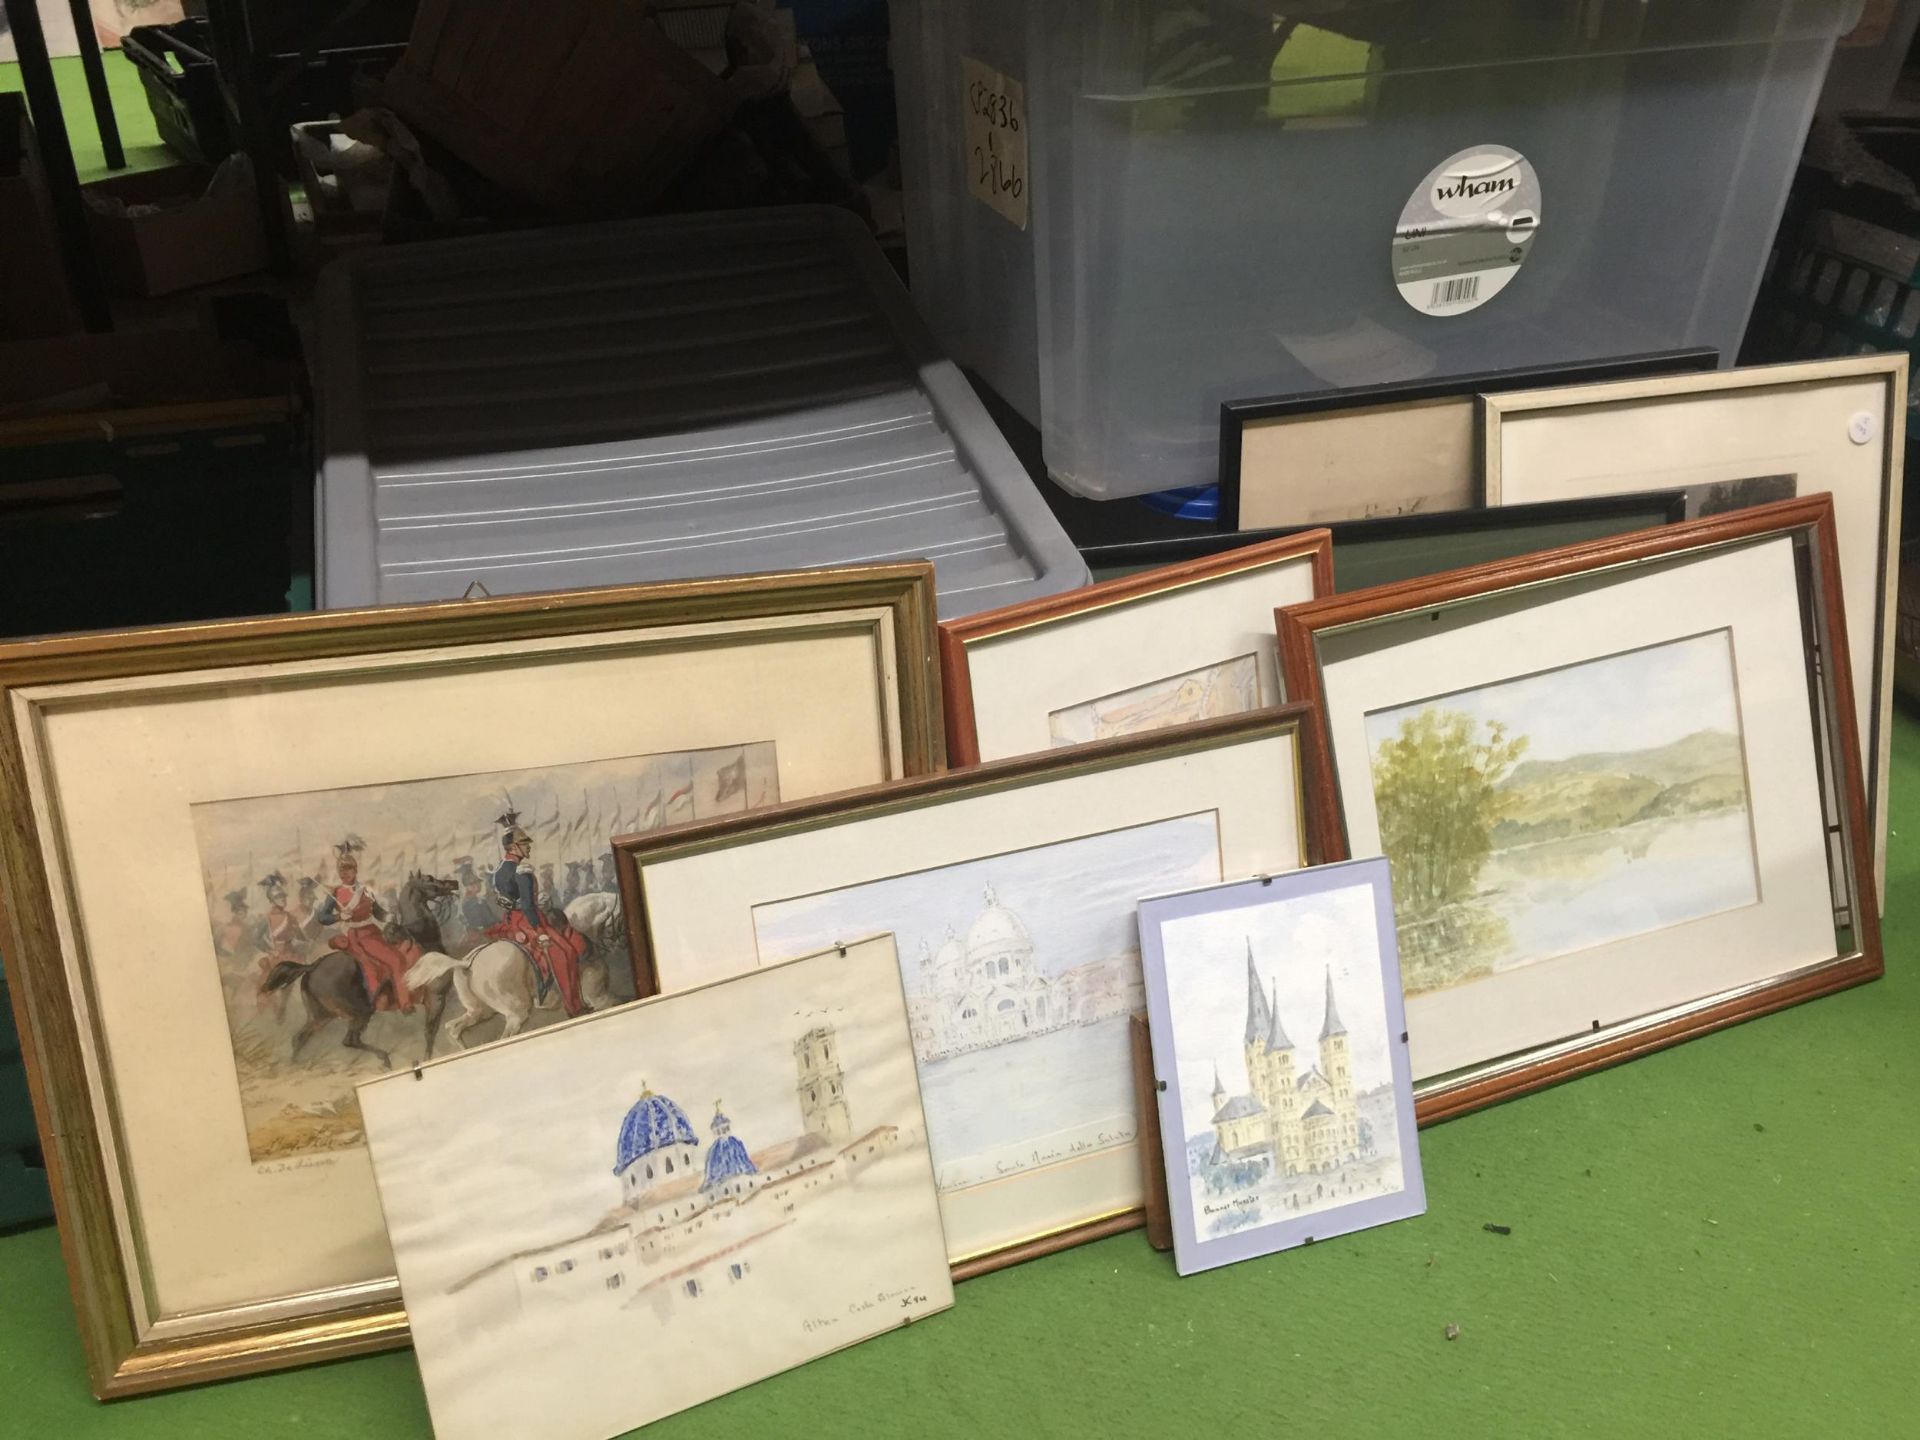 A LARGE QUANTITY OF PRINTS WATERCOLOURS AND PENCIL SKETCHES - 10 IN TOTAL